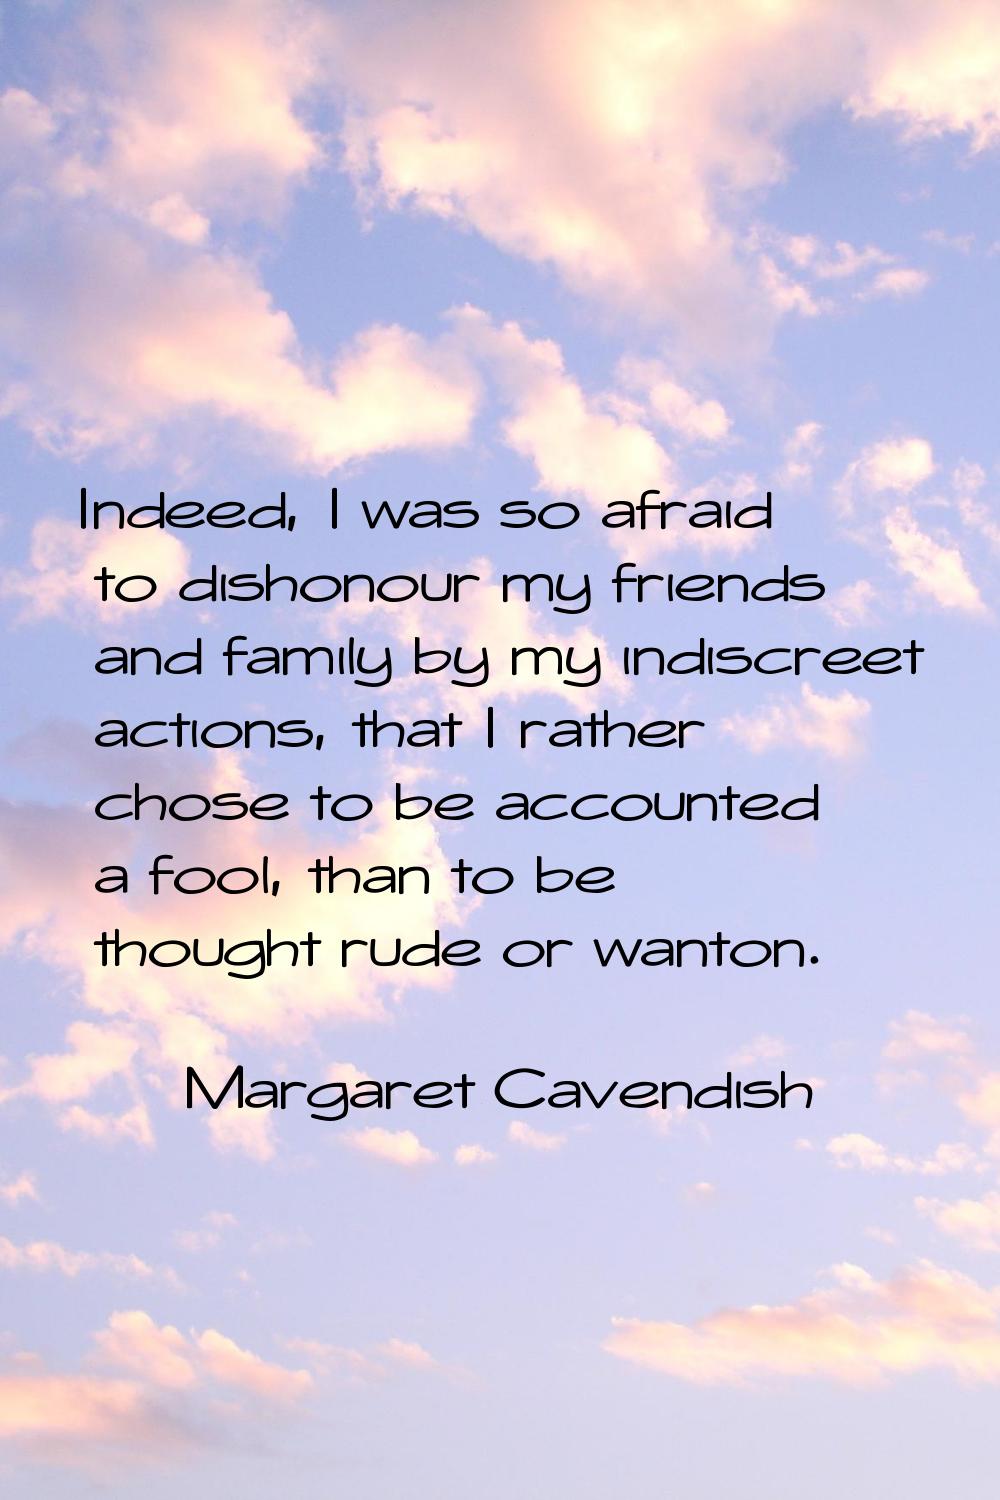 Indeed, I was so afraid to dishonour my friends and family by my indiscreet actions, that I rather 